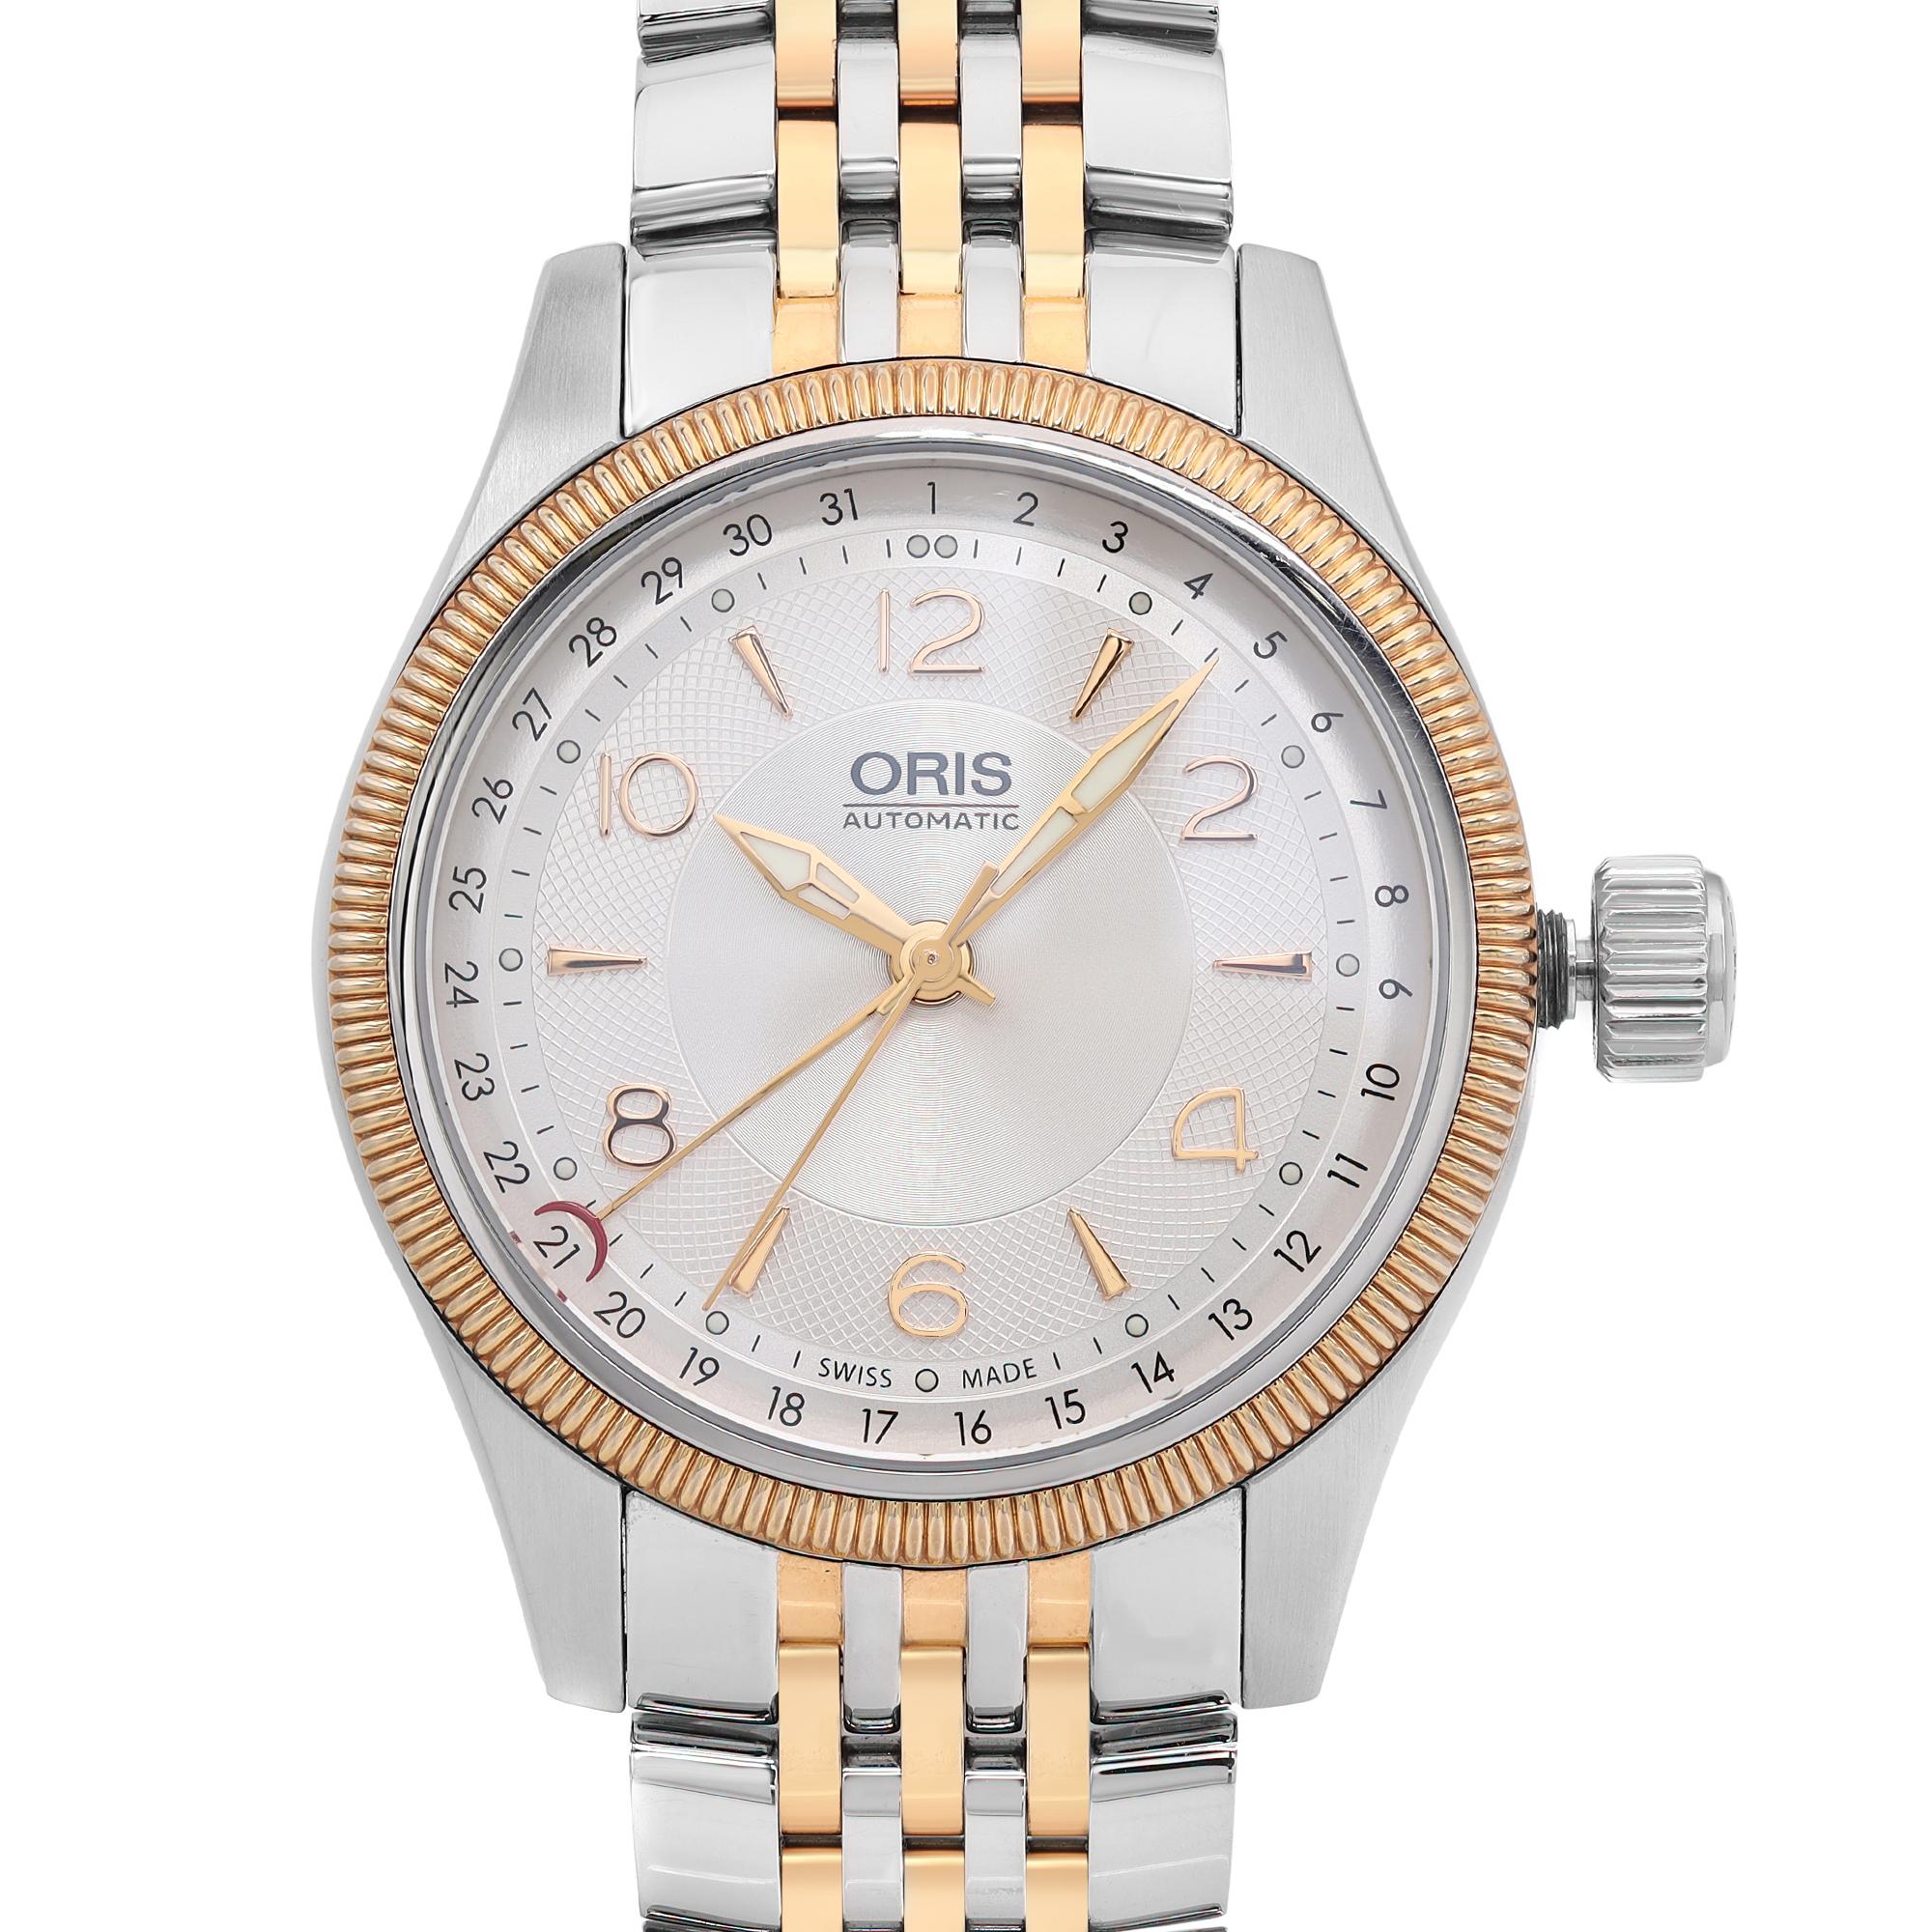 This Oris Big Crown automatic watch is in great pre-owned condition. No original box and papers are included. Comes with a presentation box and an authenticity card. Covered by a 1-year Chronostore Warranty.

Brand: Oris  Type: Wristwatch 